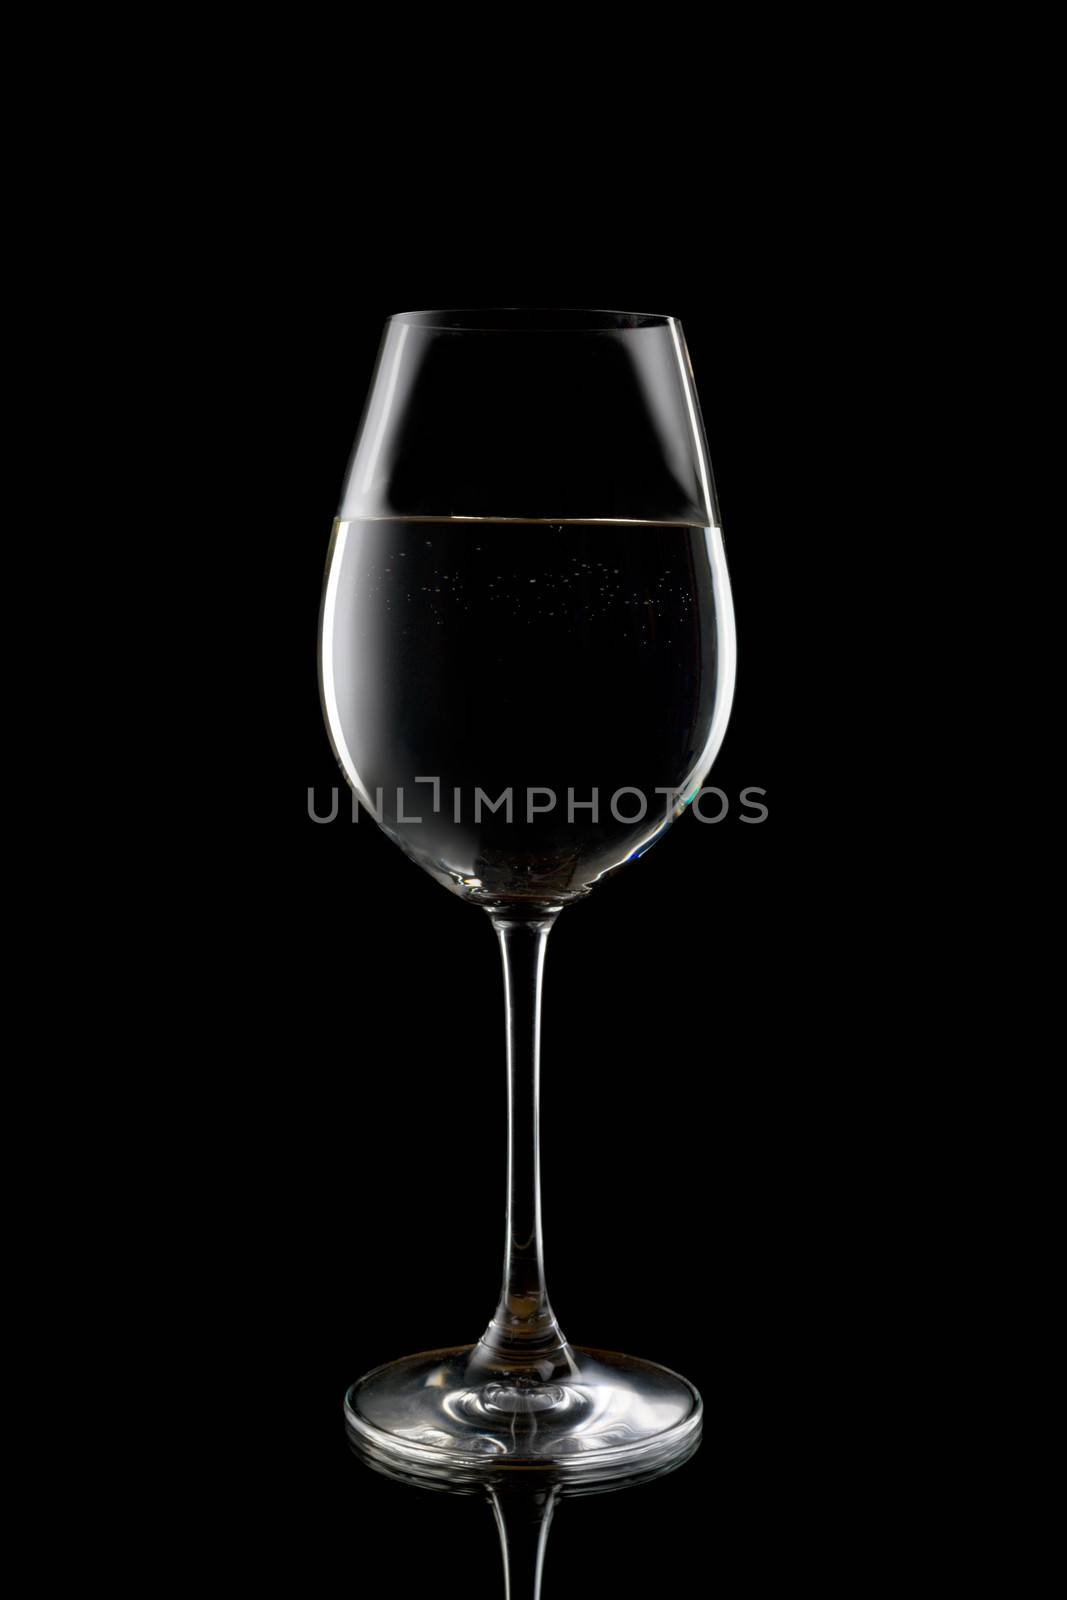 Silhouette of a wine glass with liquid. Isolate on black.